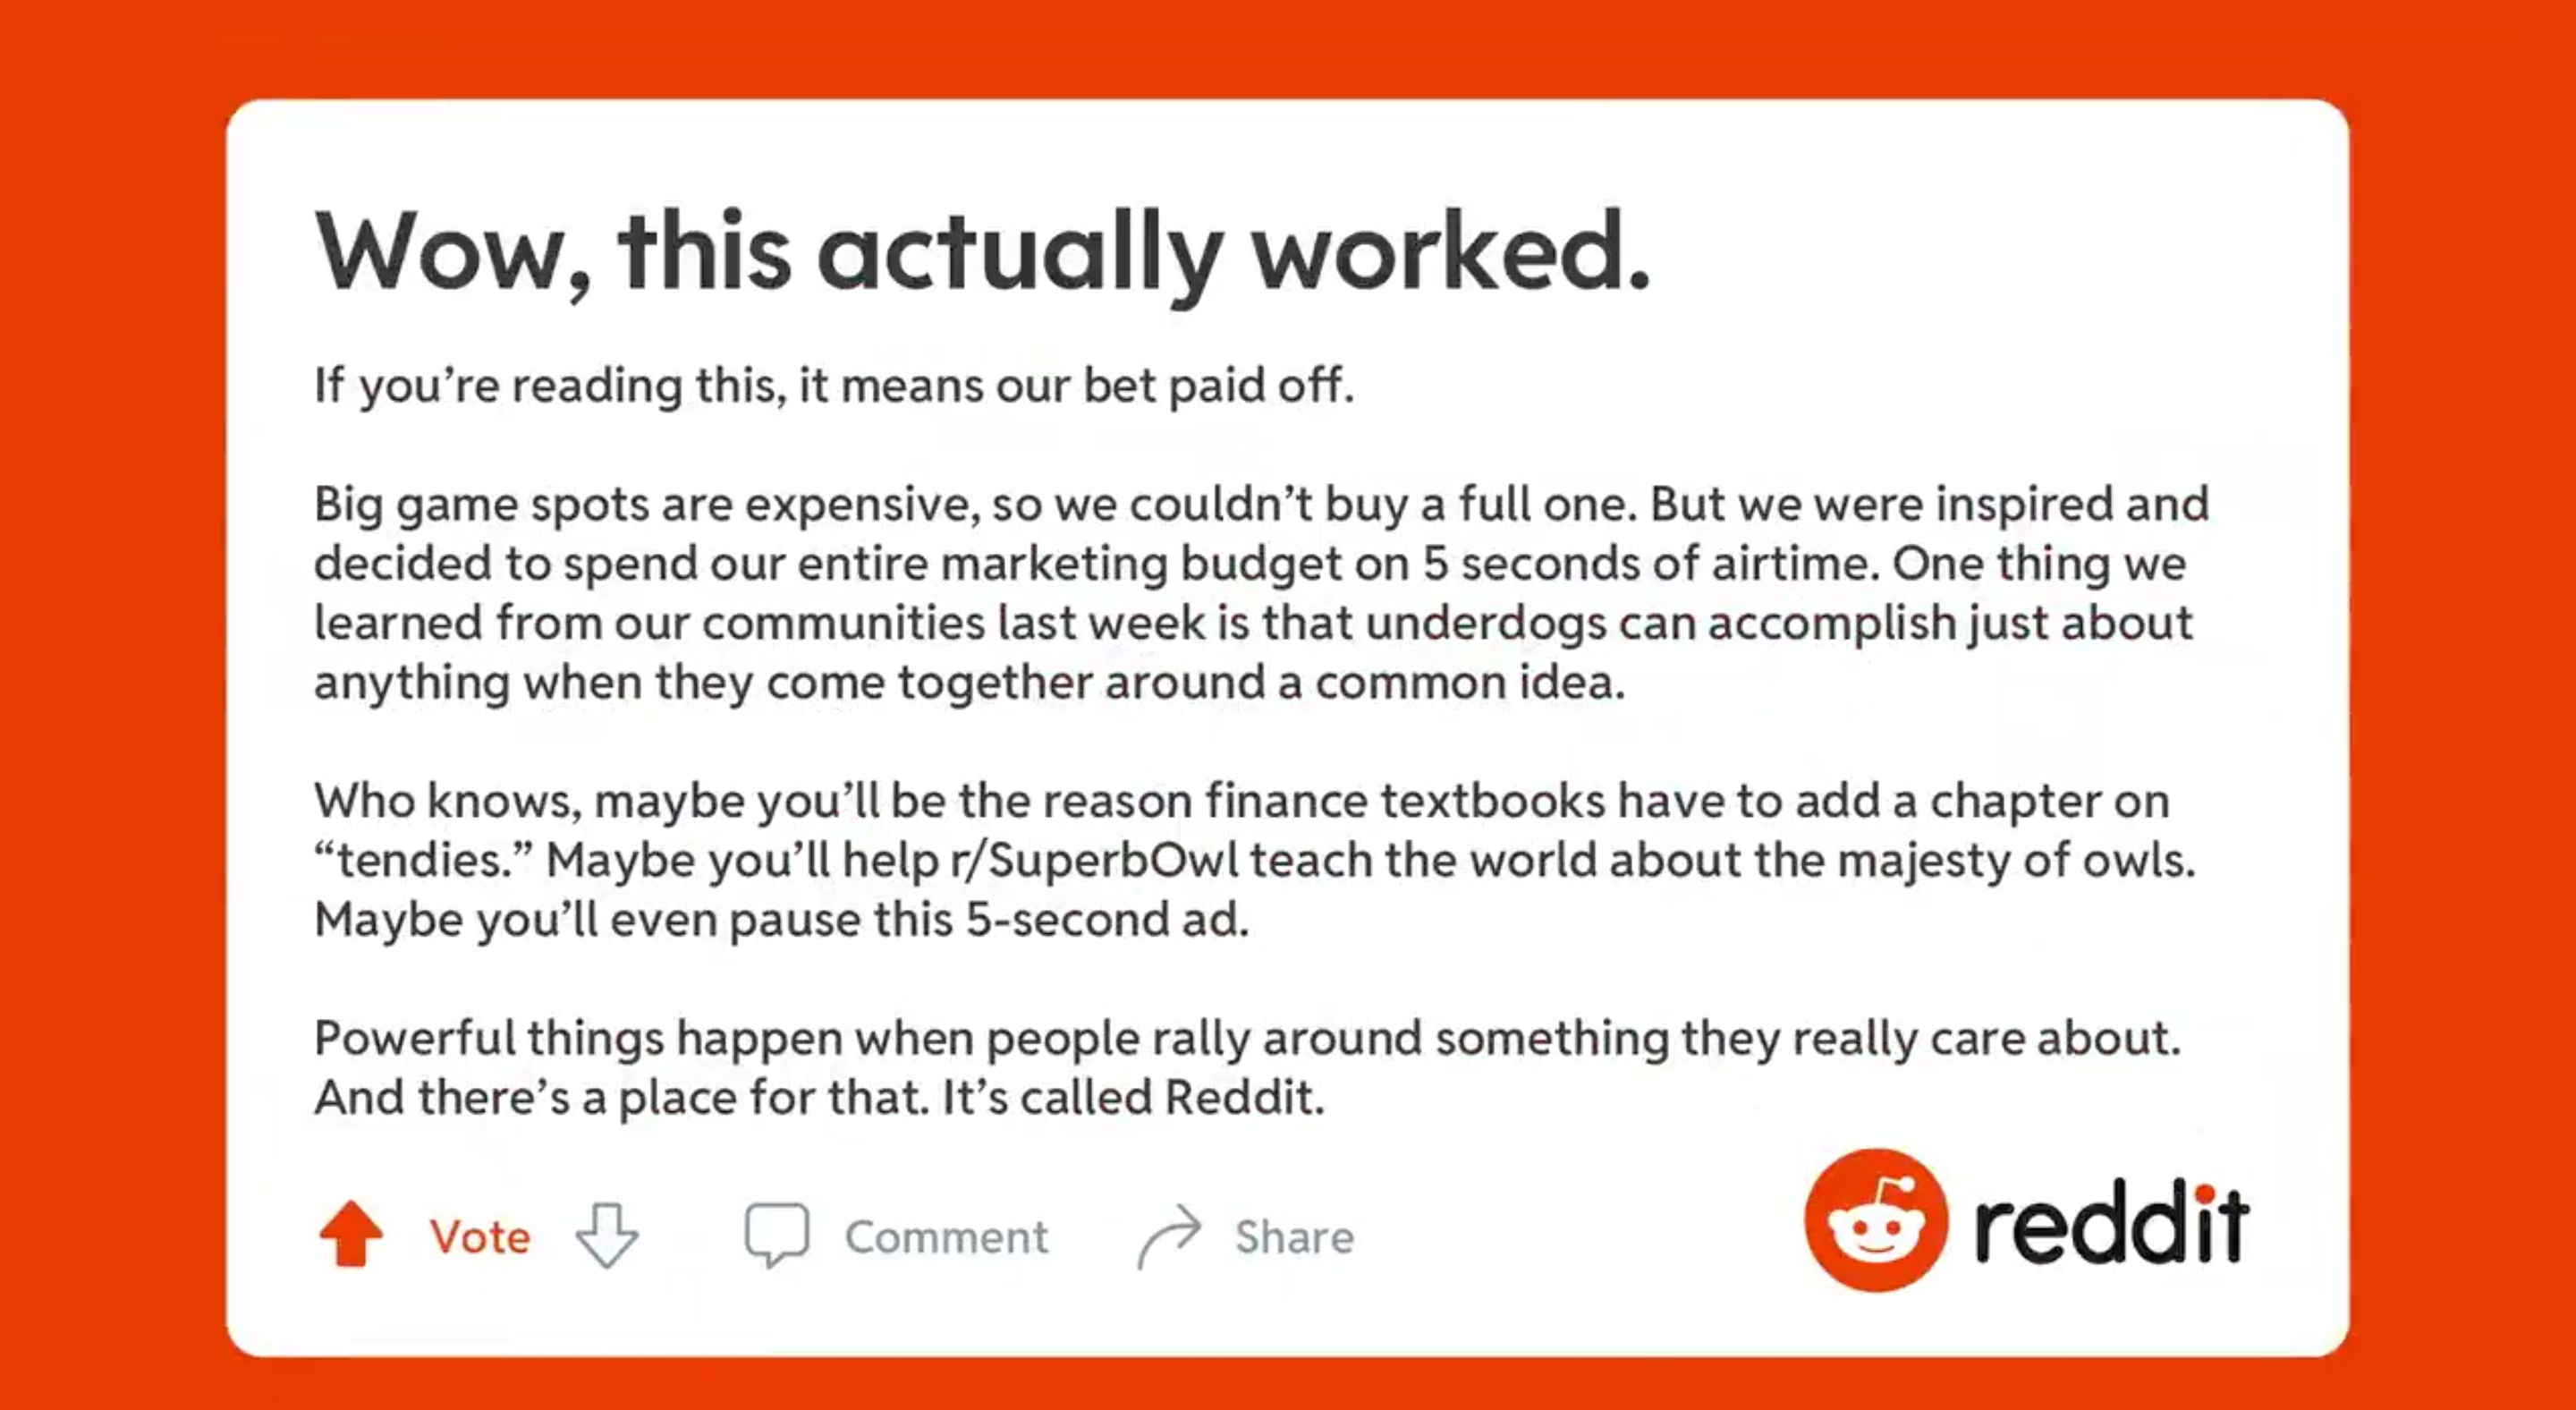 Reddit bought a 5-second Super Bowl ad in honor of the “underdogs” involved in GameStop’s commercial frenzy